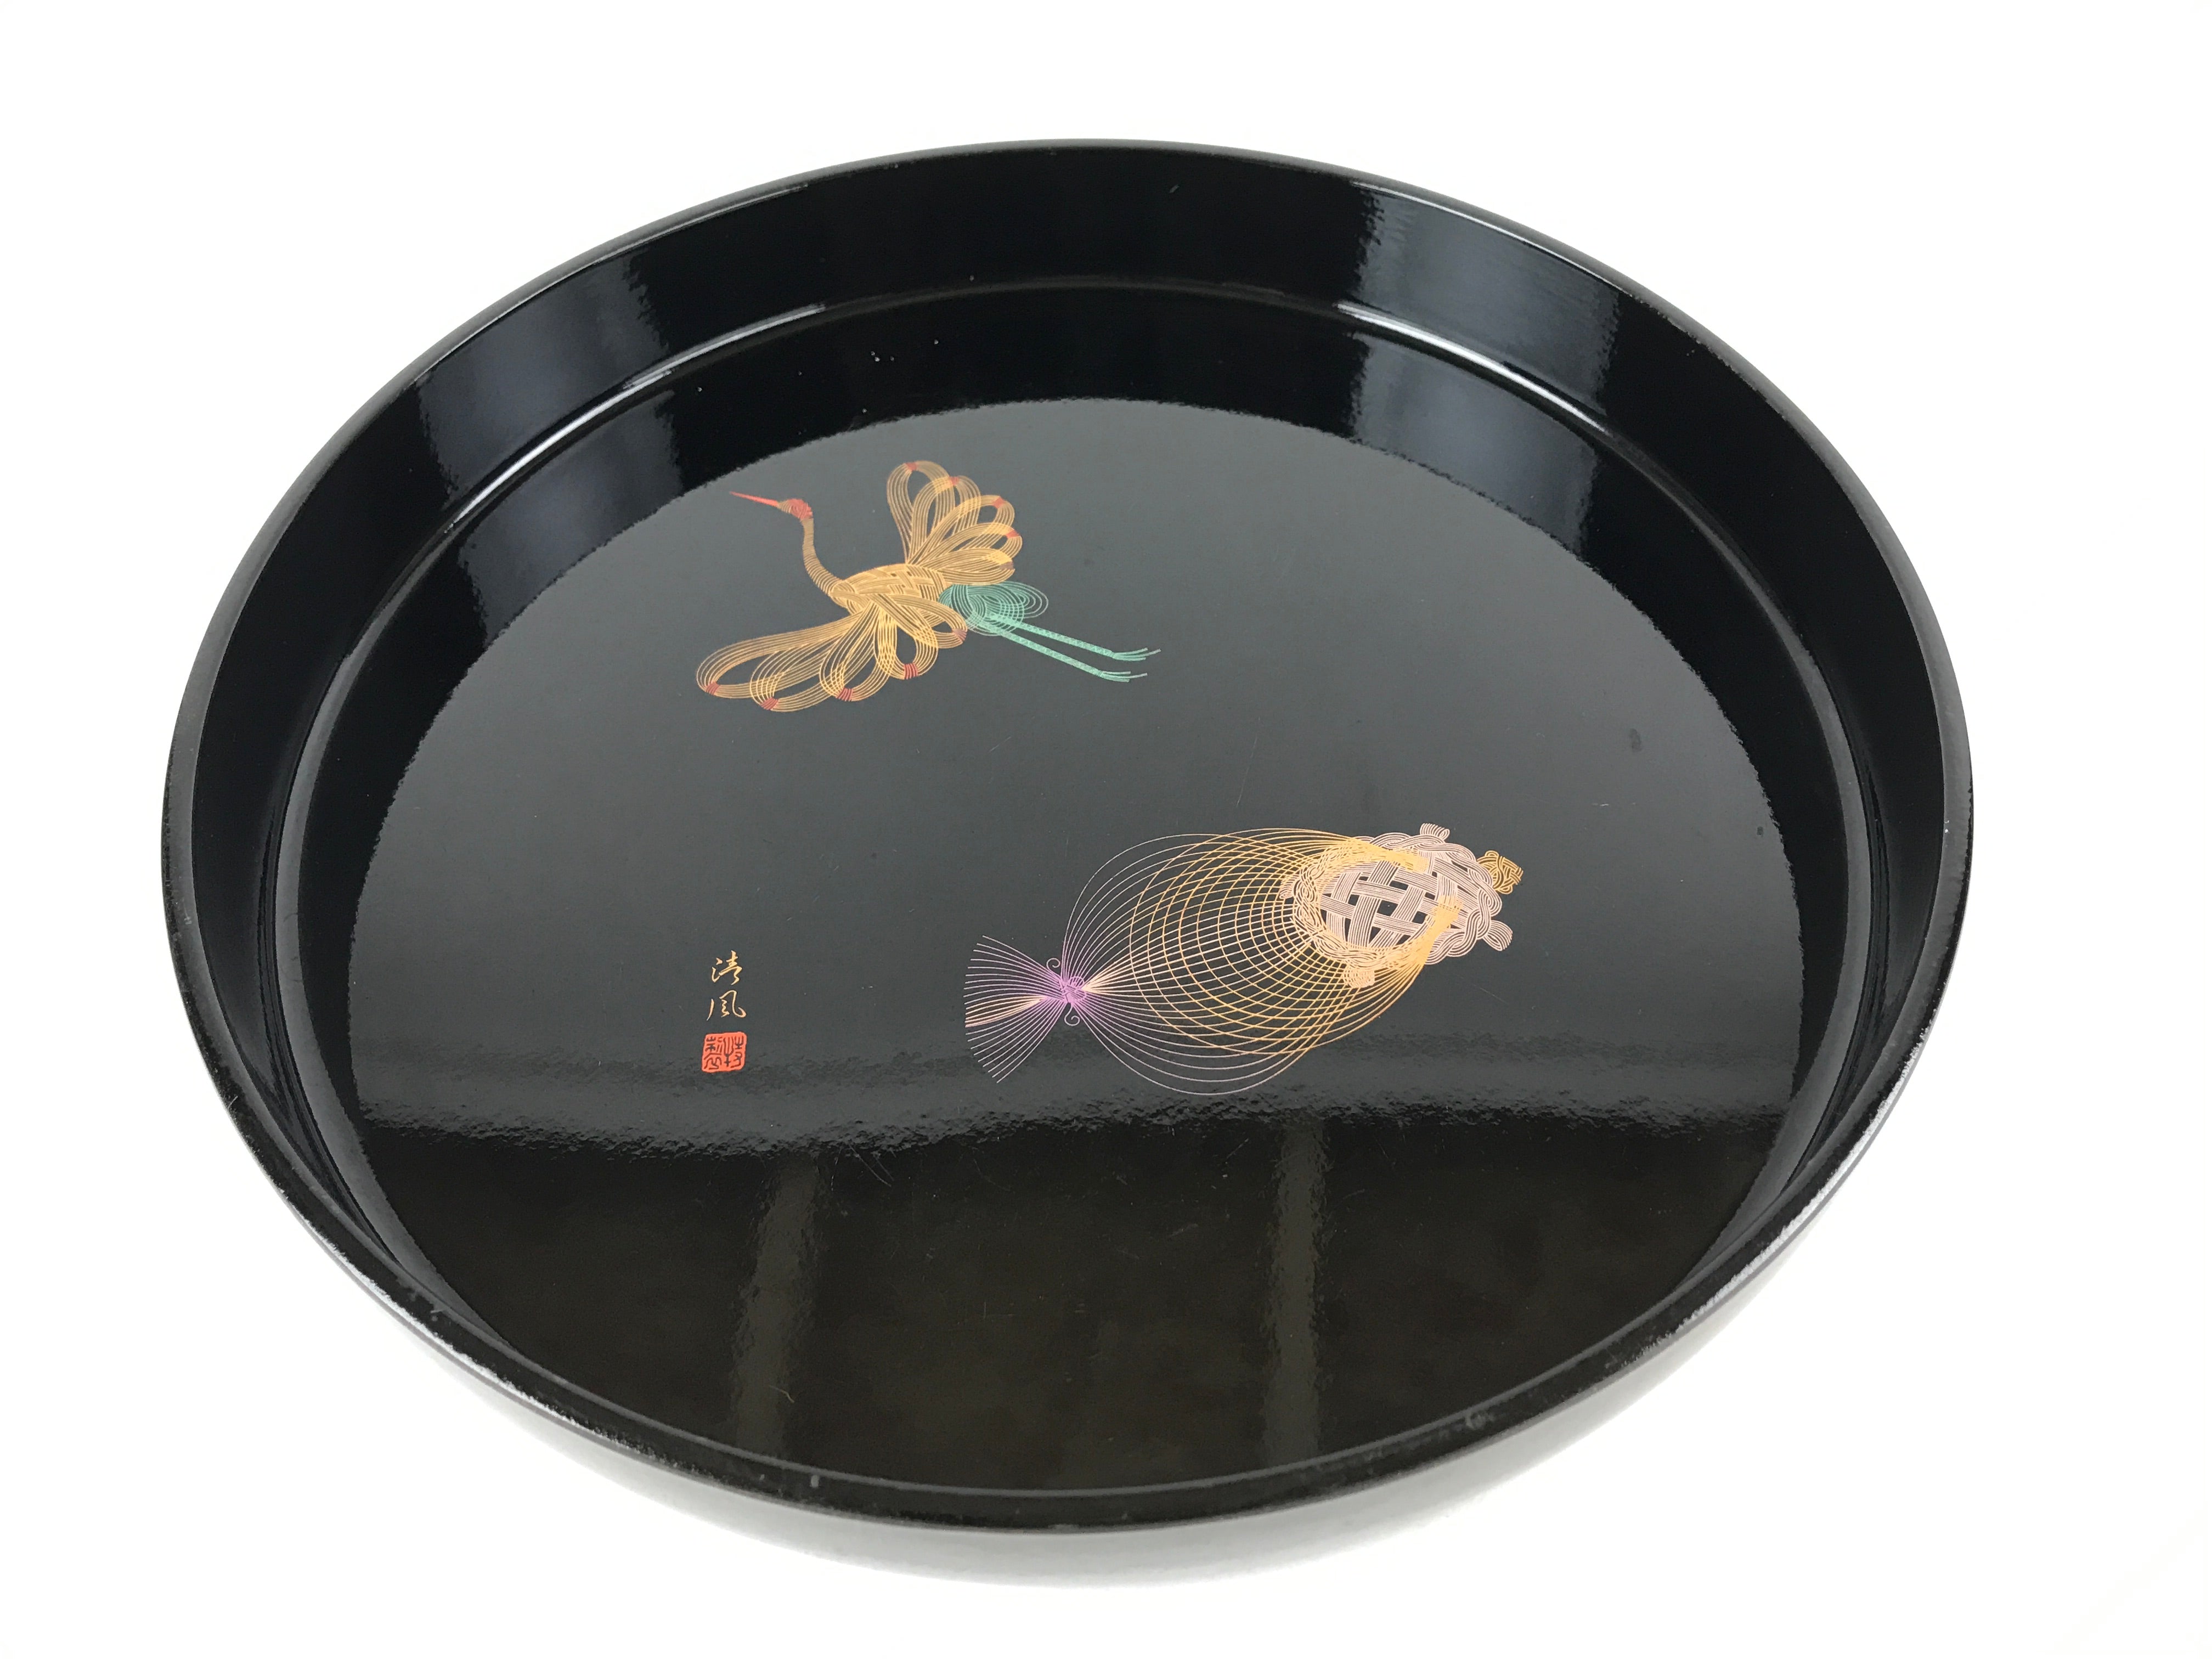 Japanese Lacquer Replica Round Serving Tray Vtg Flying Crane Black Res, Online Shop